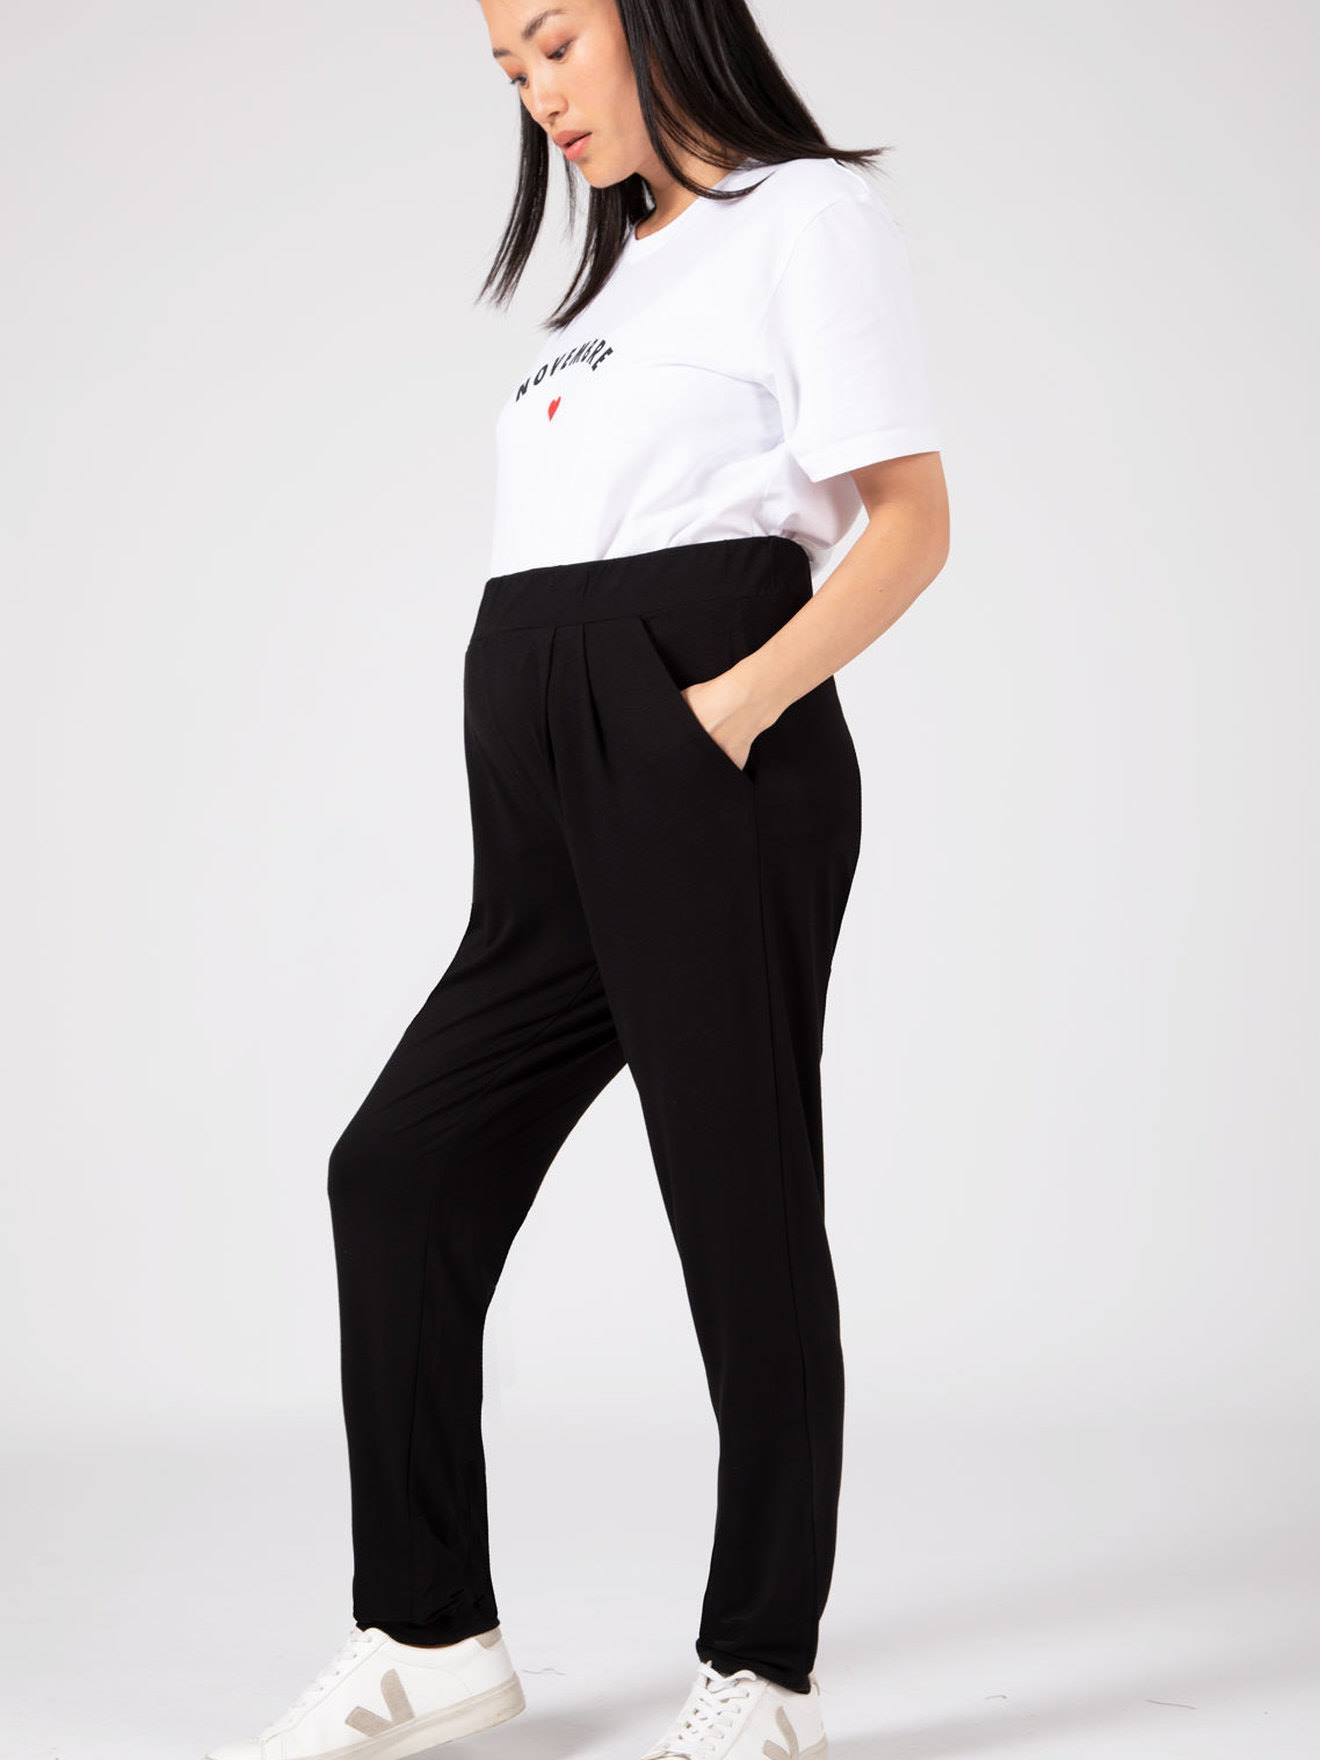 Buy Maternity Trousers, Jogging Trousers, Fitness Trousers